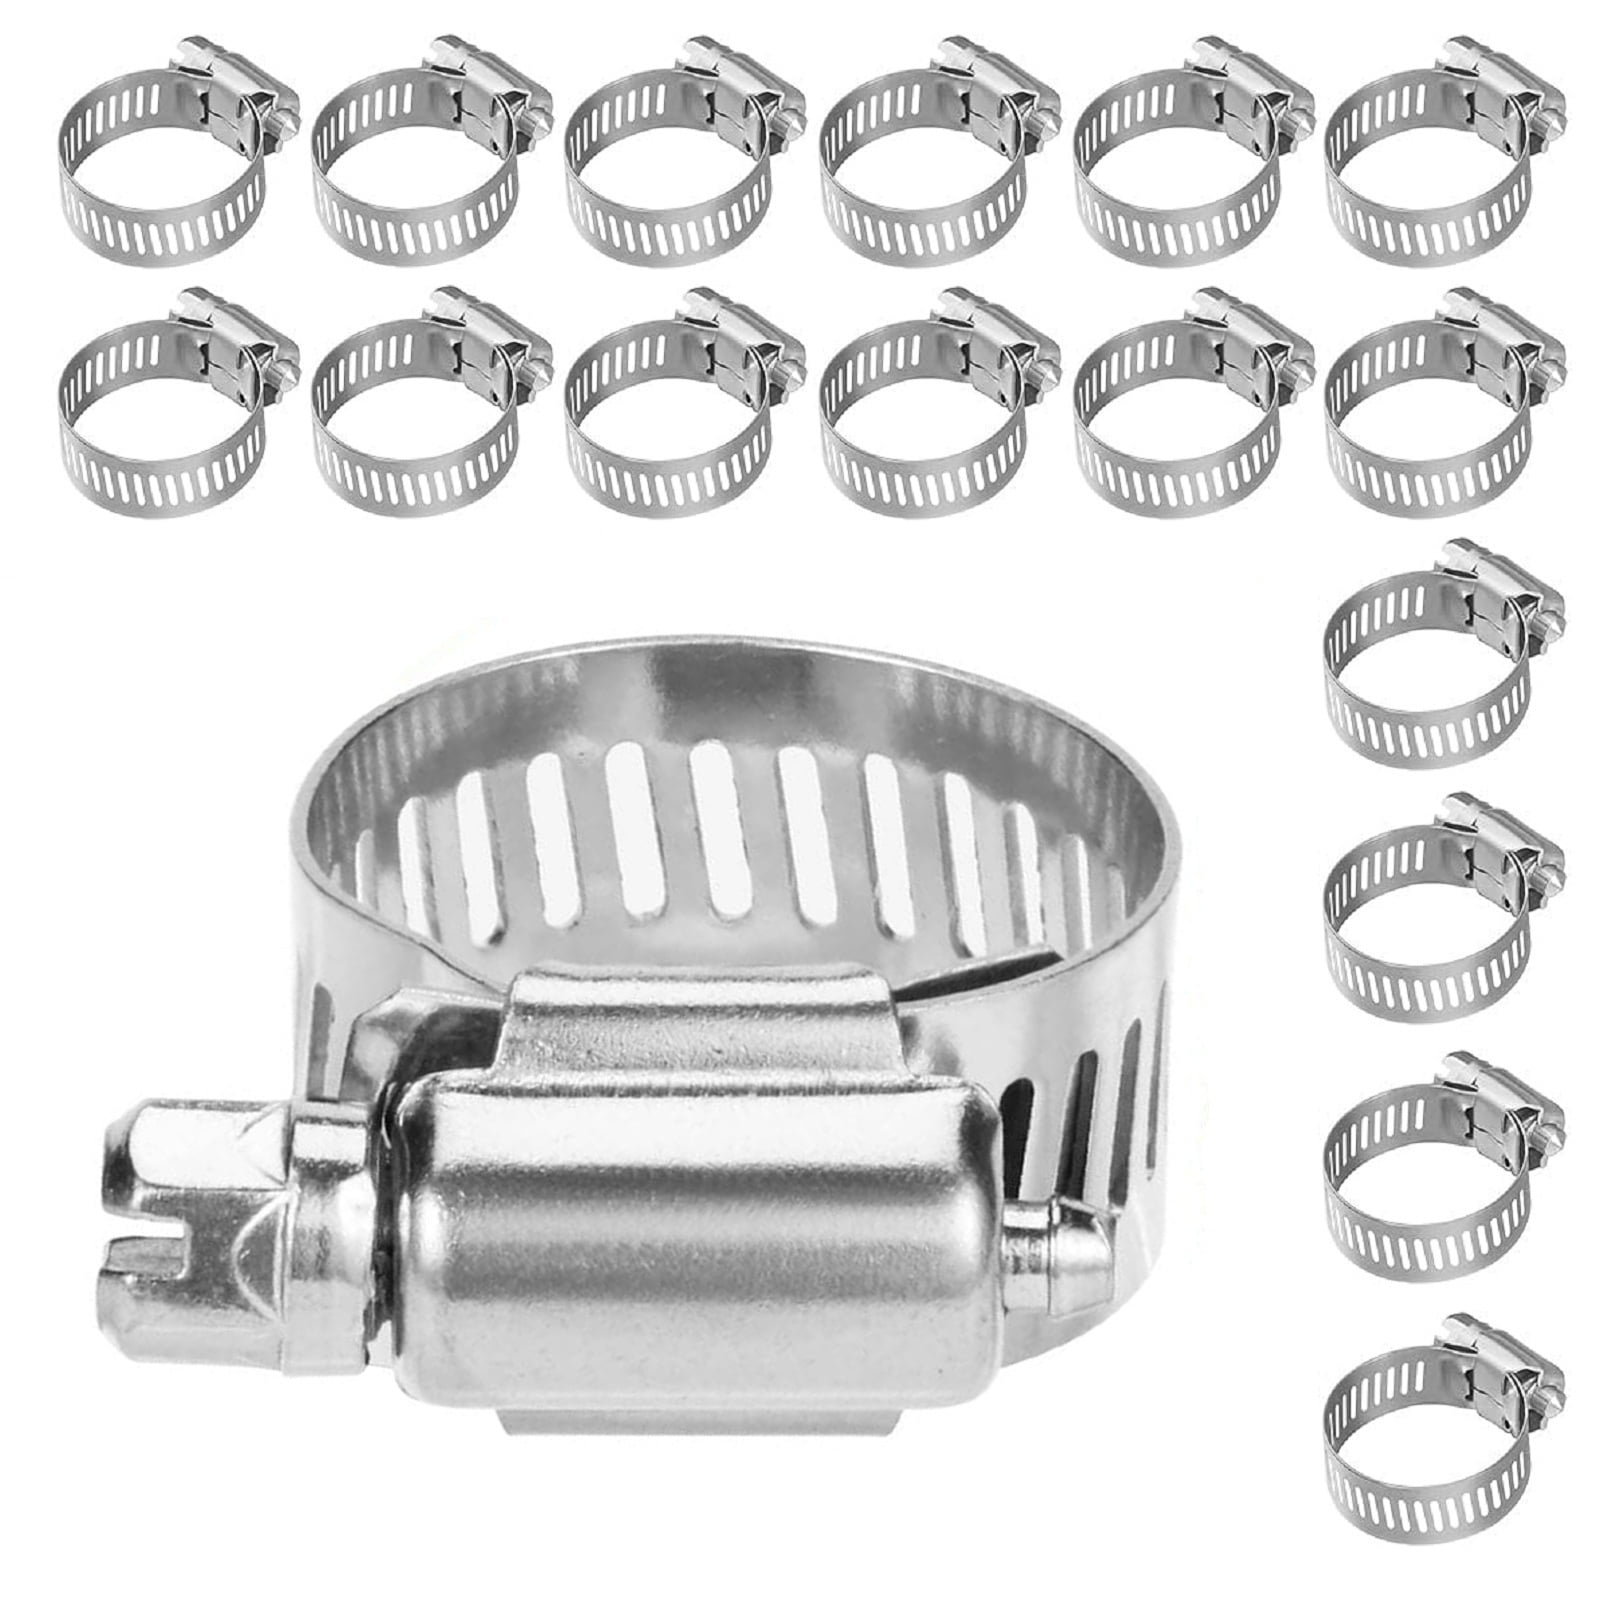 50pcs 3/8-1/2 Adjustable Stainless Steel Drive Hose Clamps Fuel Line Worm Clip 